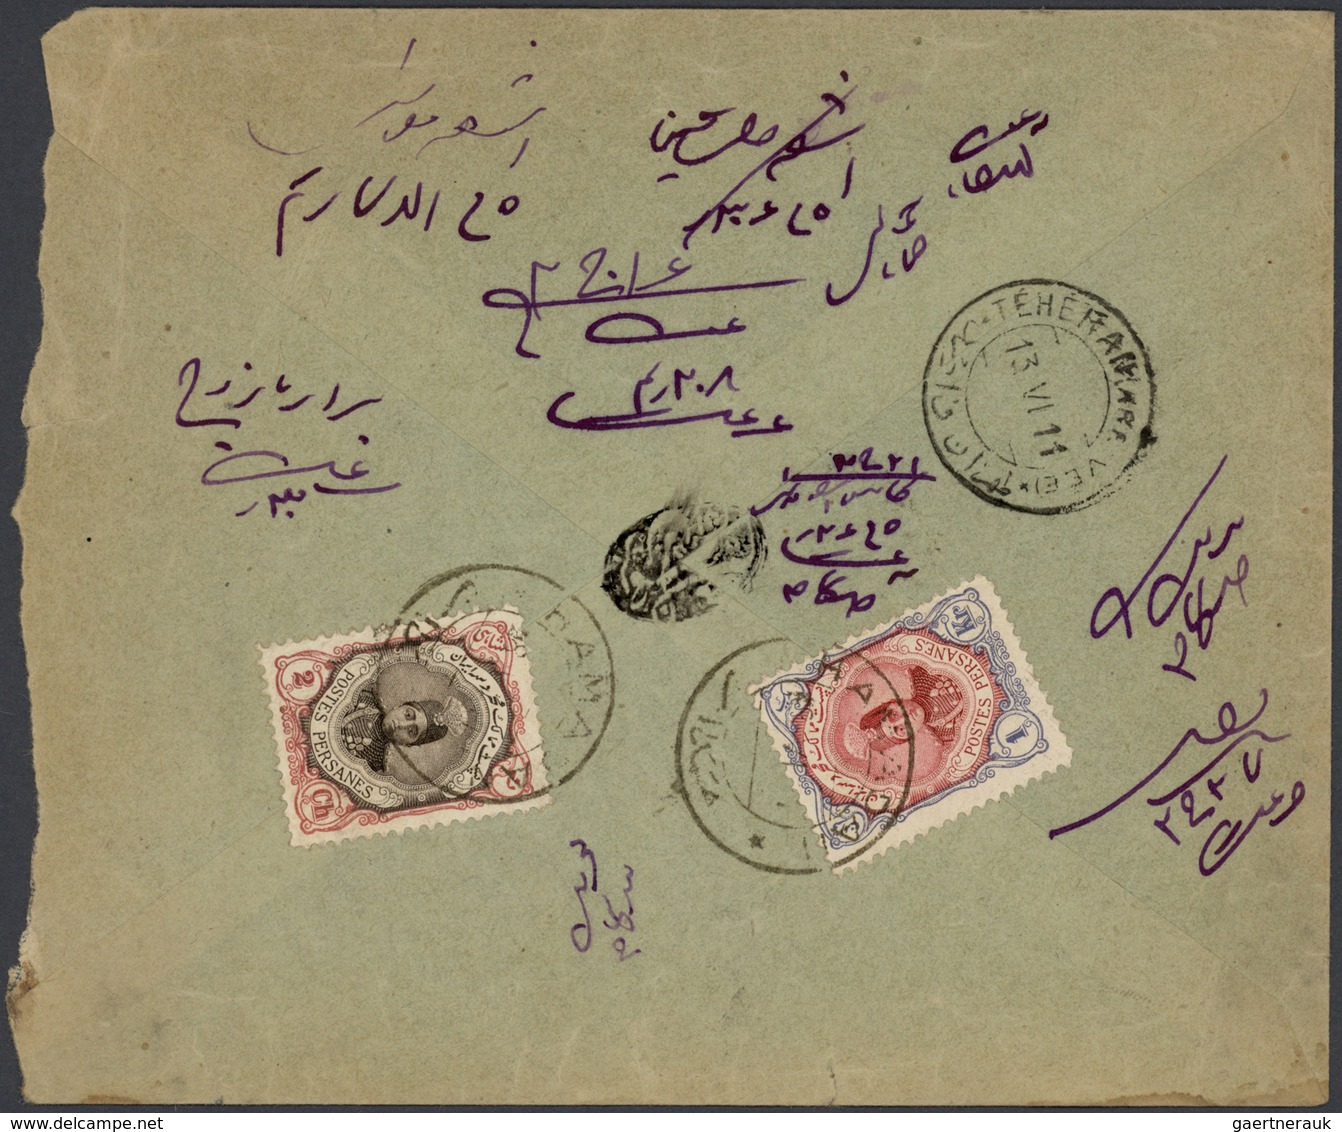 22821 Iran: 1910-30, Collection of 180 covers with many different postal markings and censors, postage due